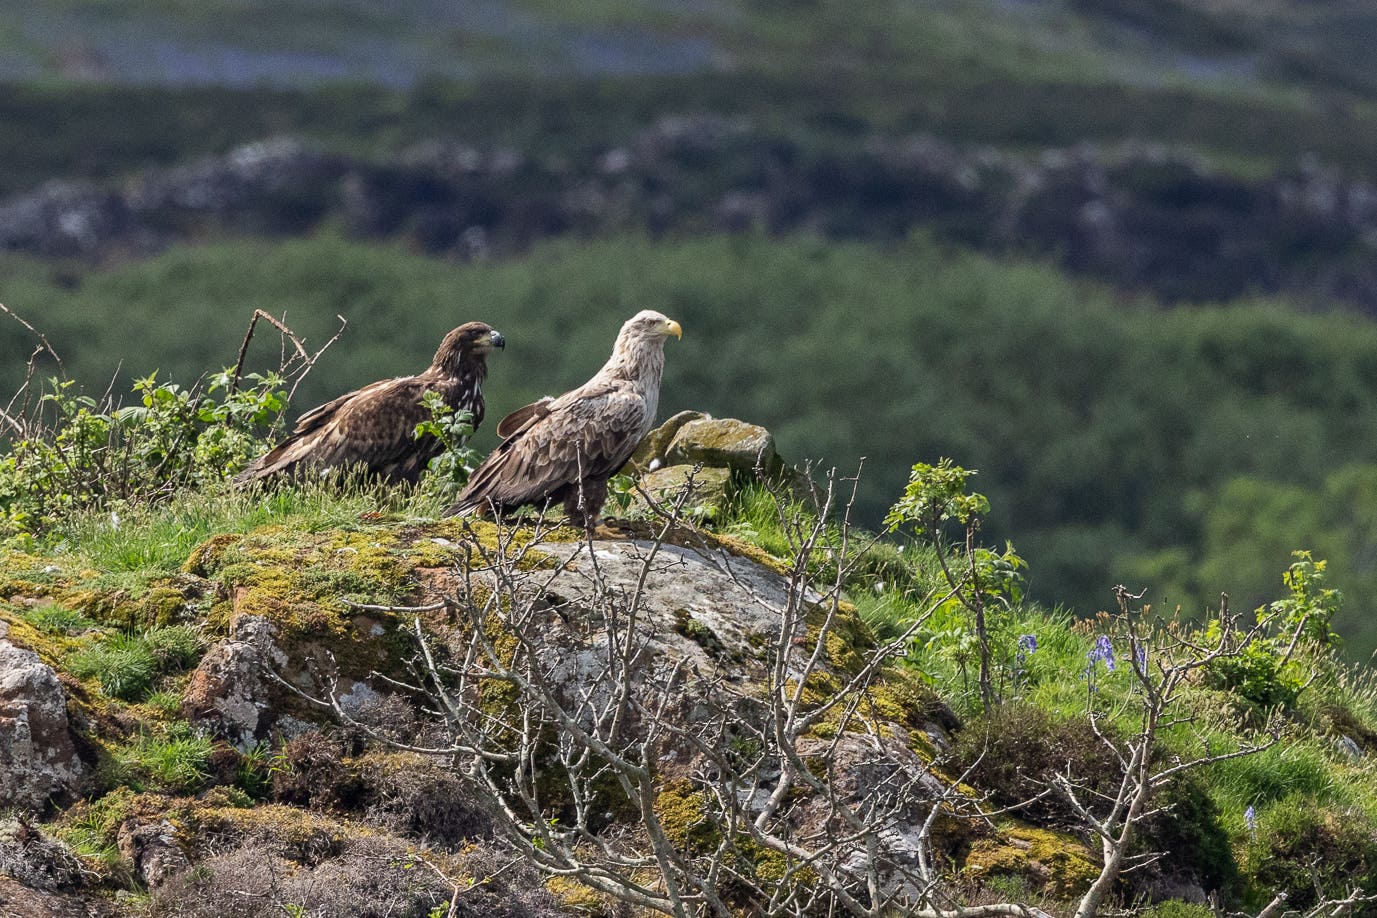 An injured white-tailed eagle is still being cared for by its parents (Handout/PA)